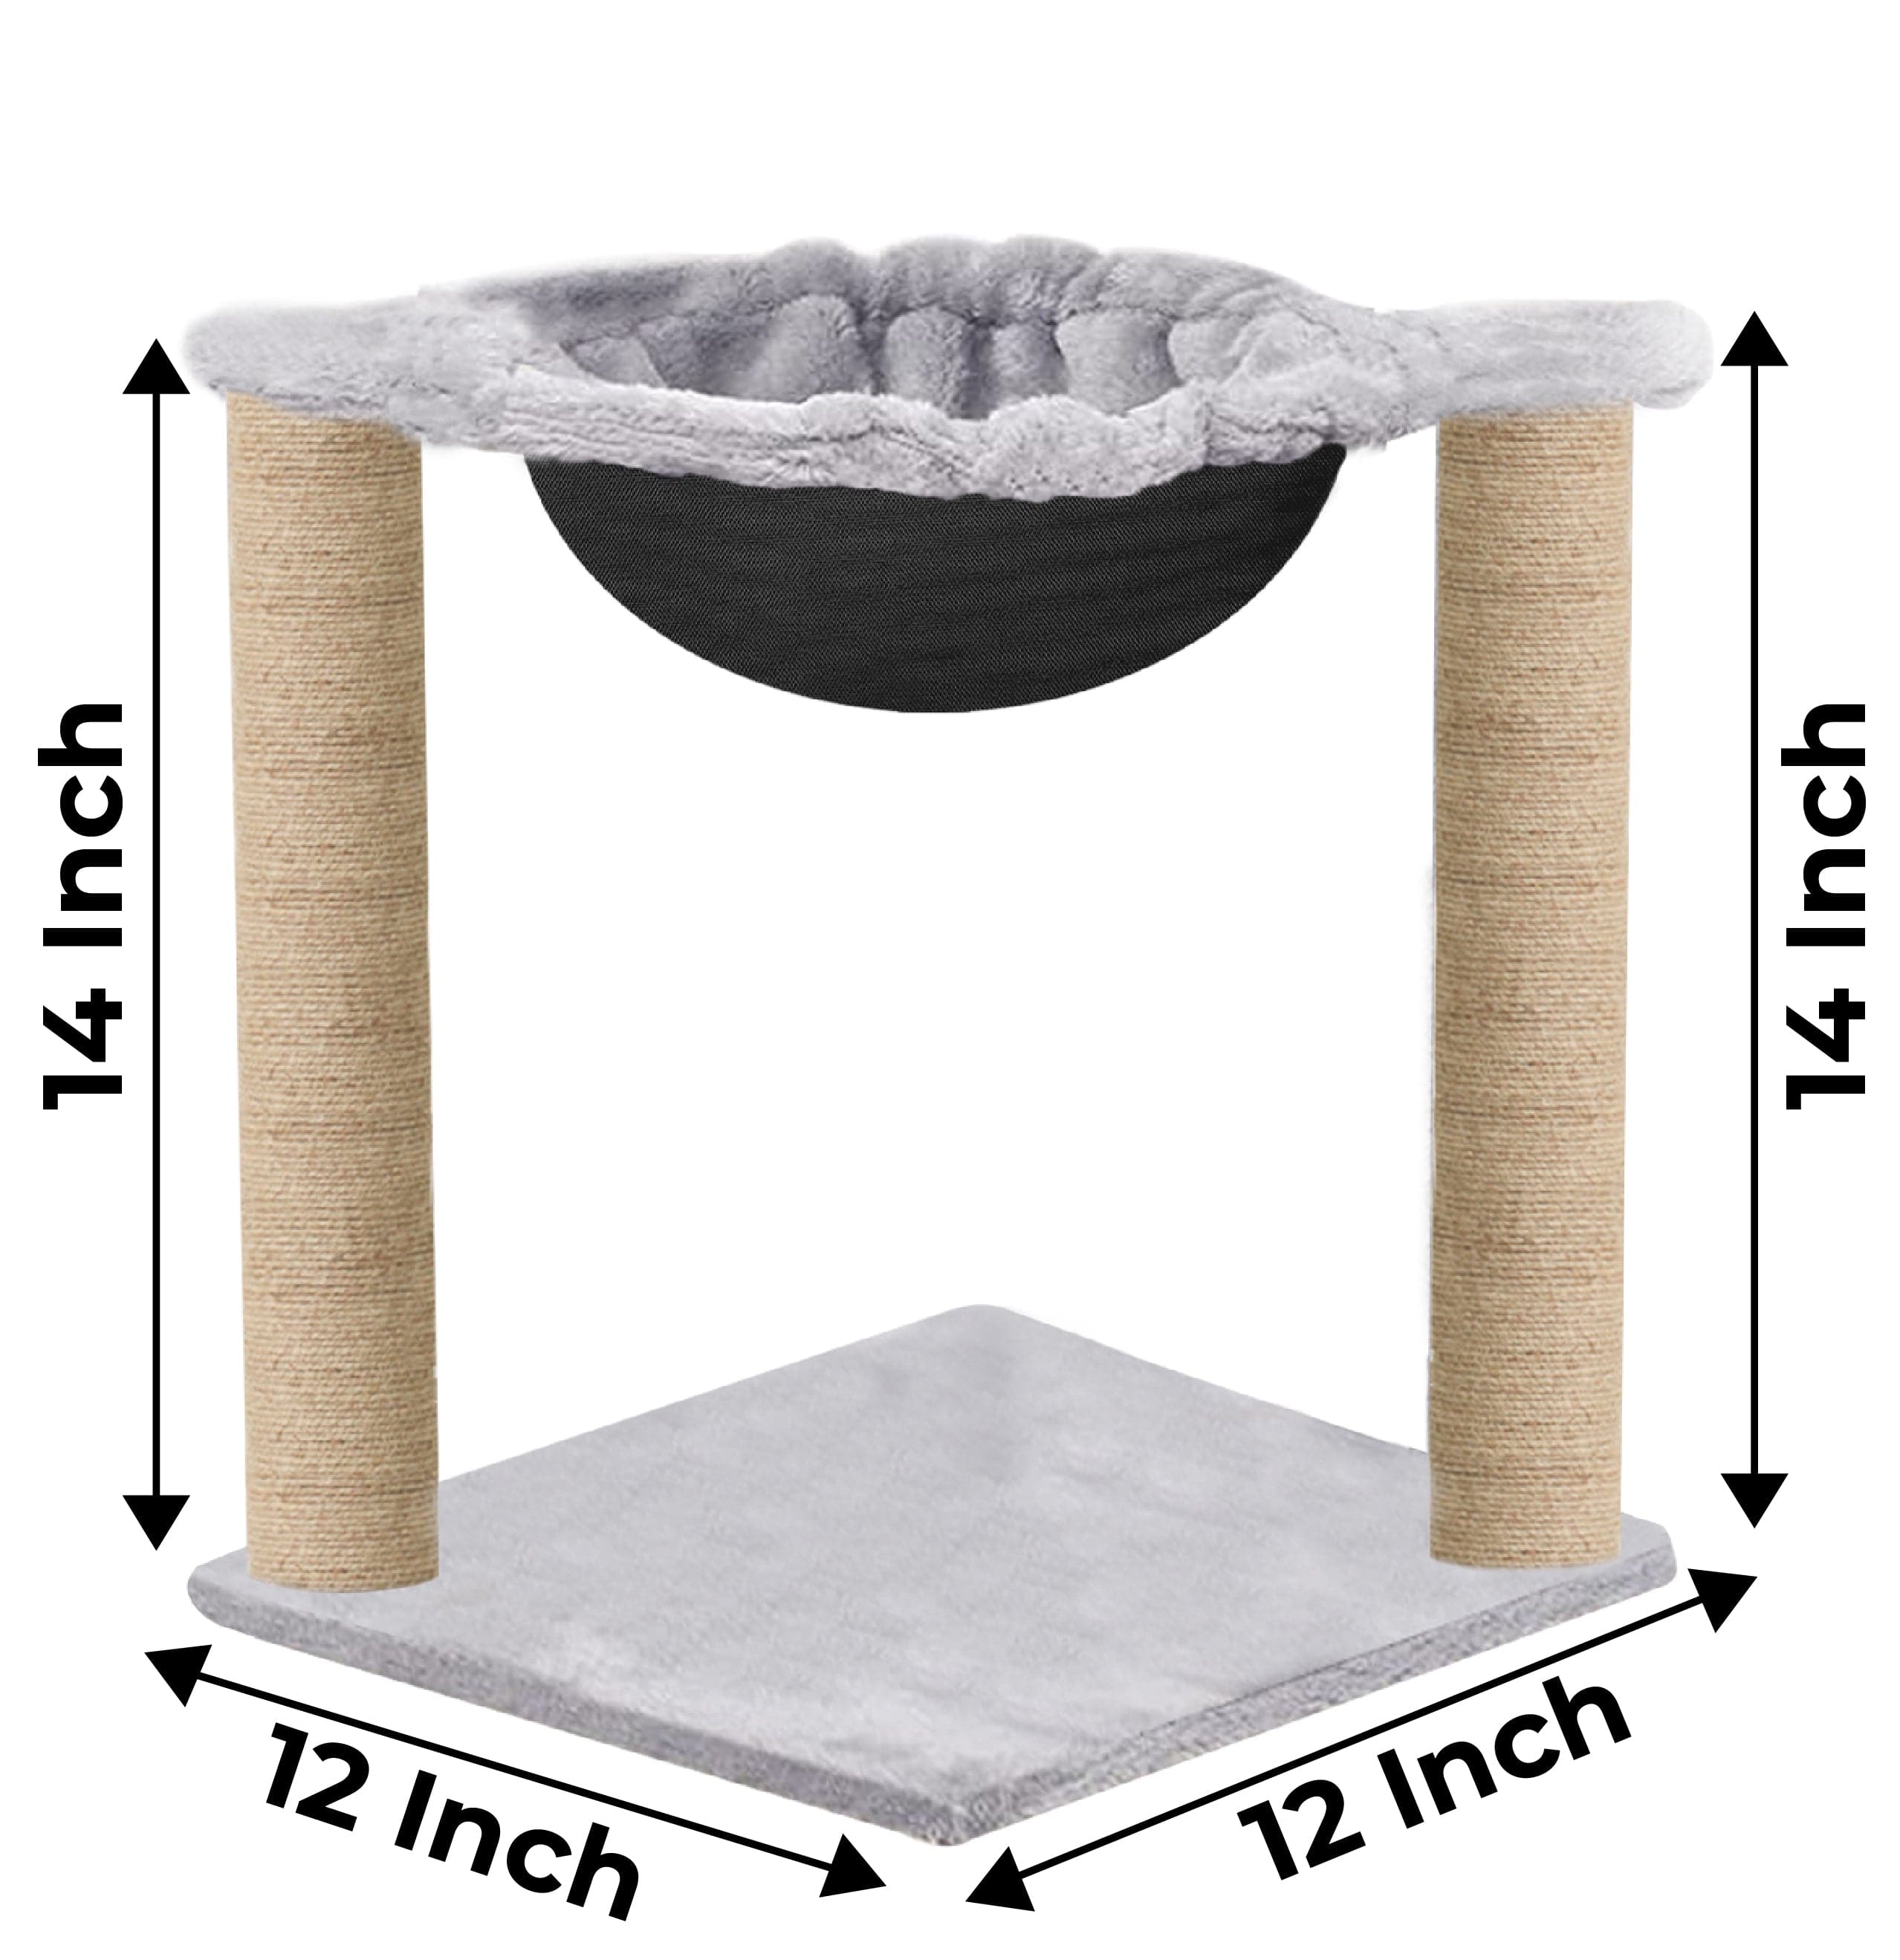 Hiputee Scratching Post, Activity Tower, Plush Fur Fabric Hammock, Basket Lounger ,Sisal/Jute Covered Rope Tree for Kittens & Cats (Grey)